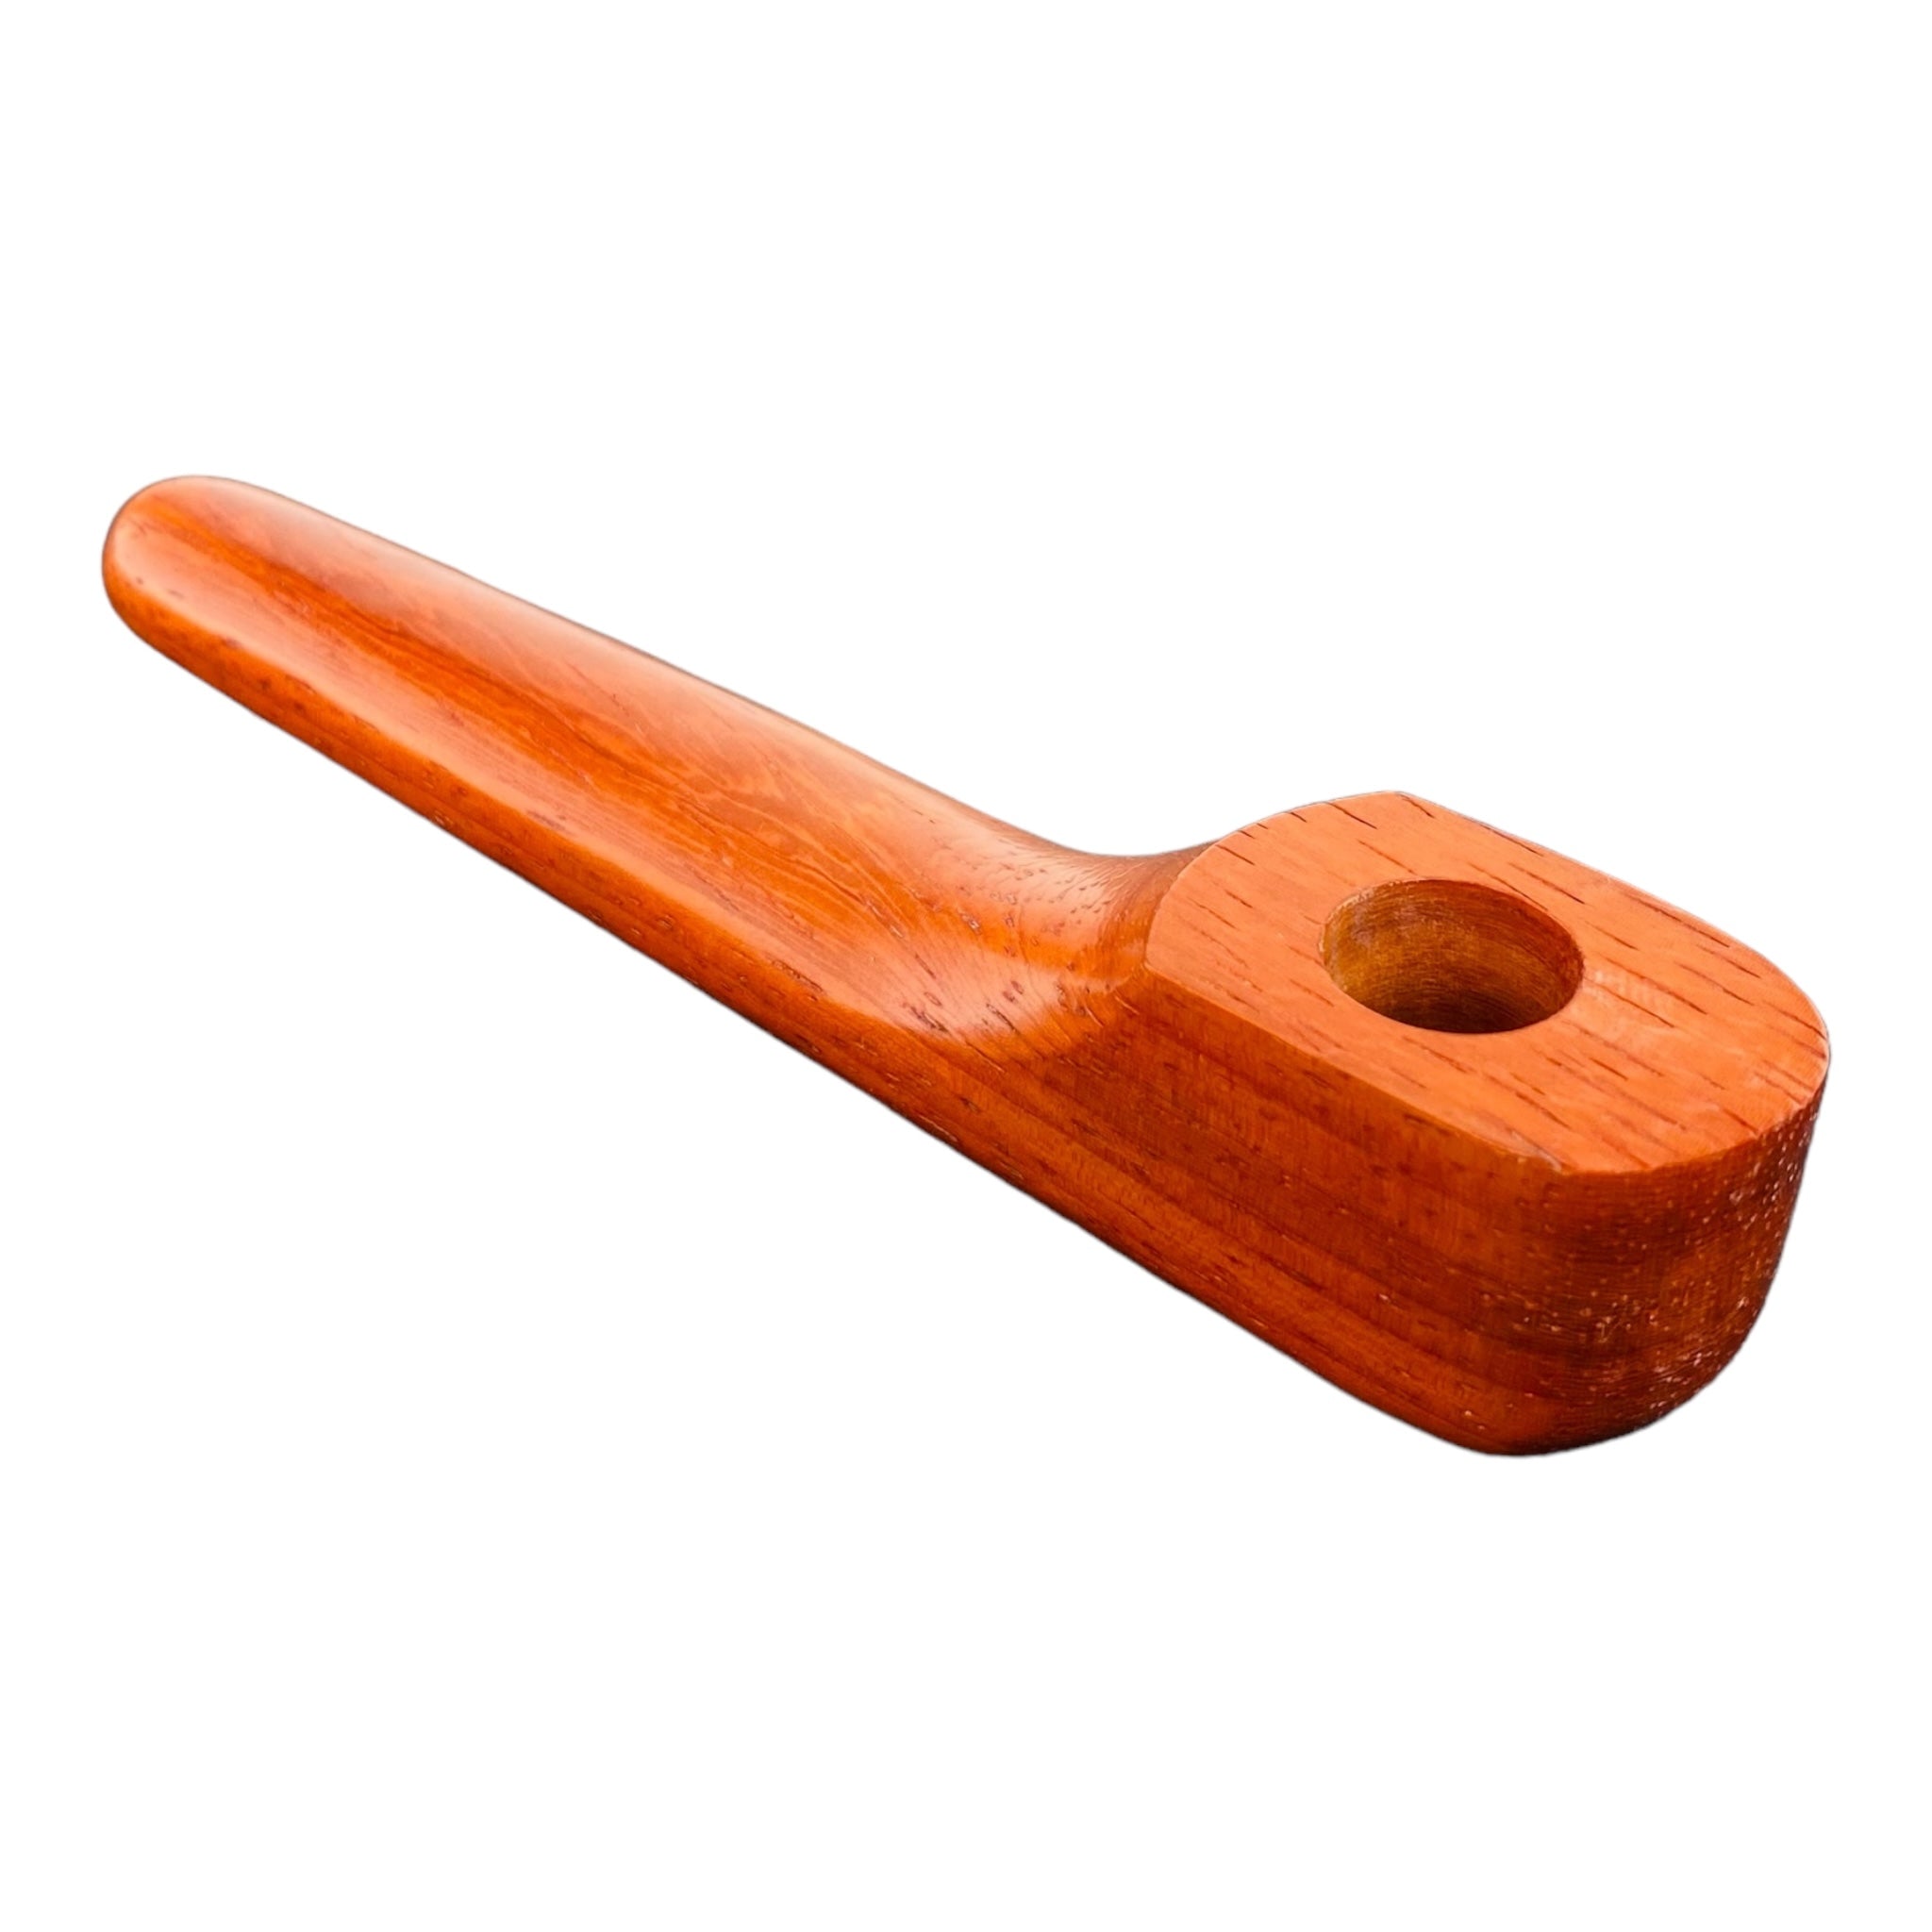 Wood Hand Pipe - 6 Inch Long Stem Wood Pipe Made From Mahogany for weed and tobacco